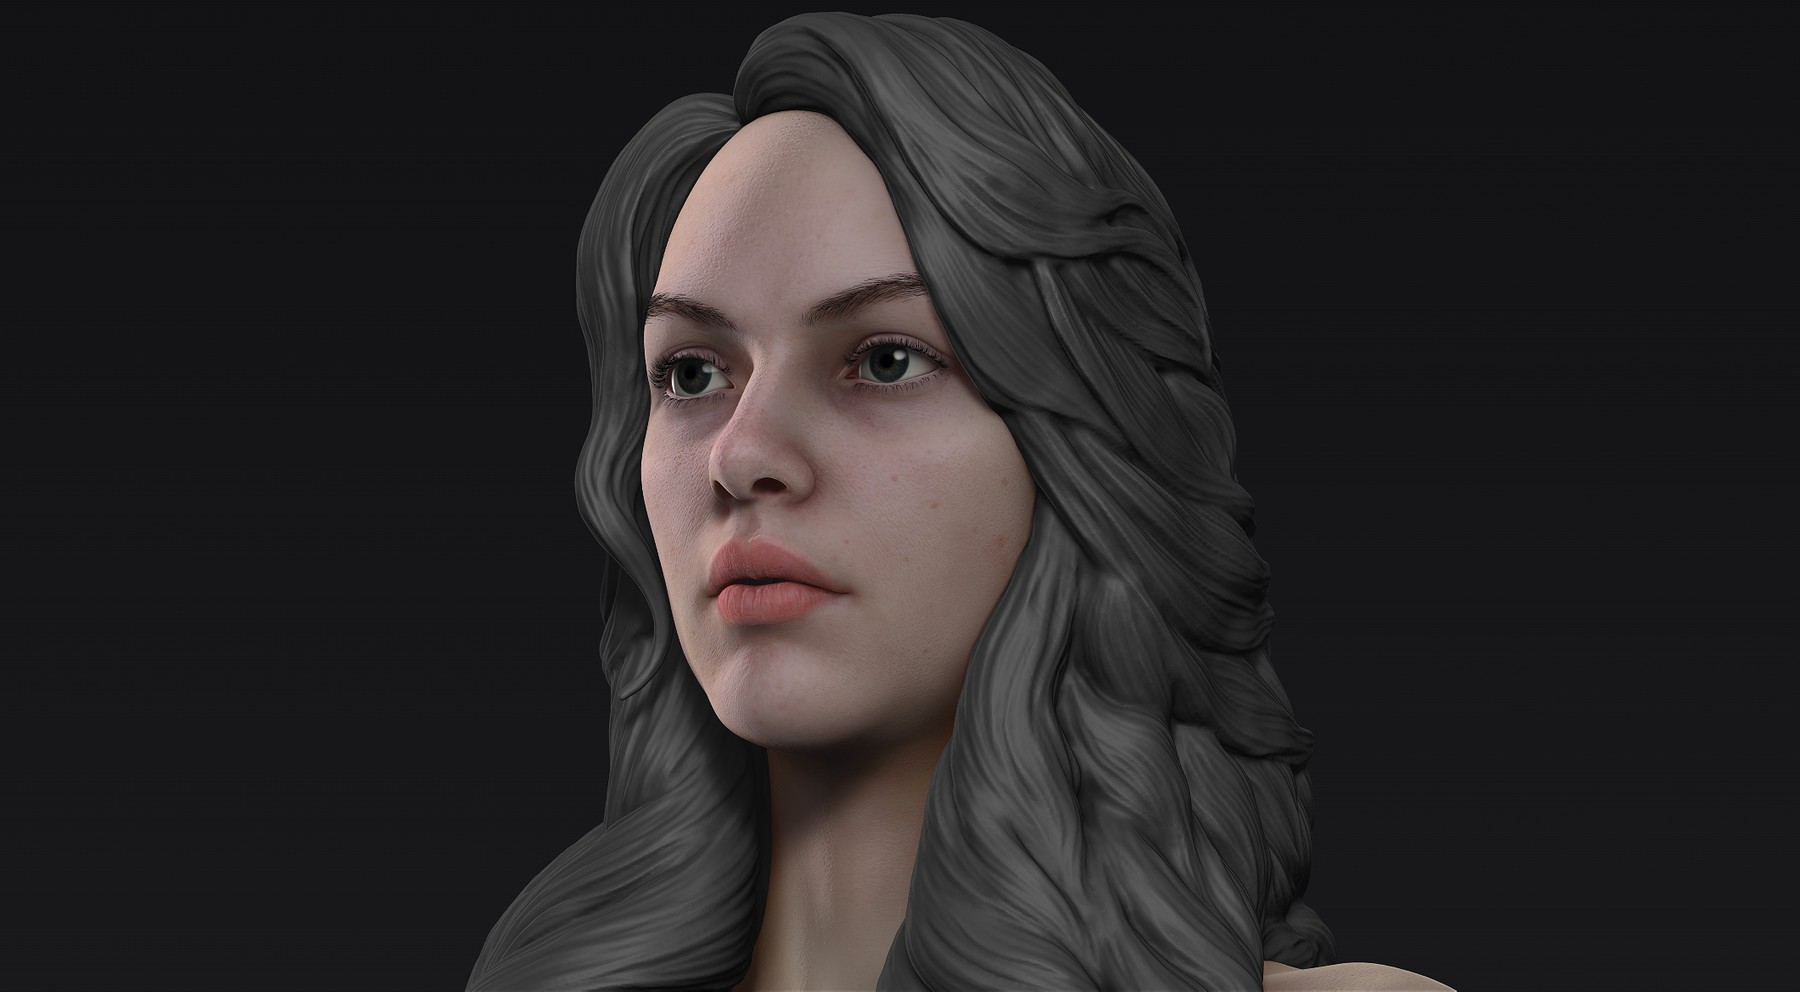 ArtStation - Realistic Woman Zbrush | Resources